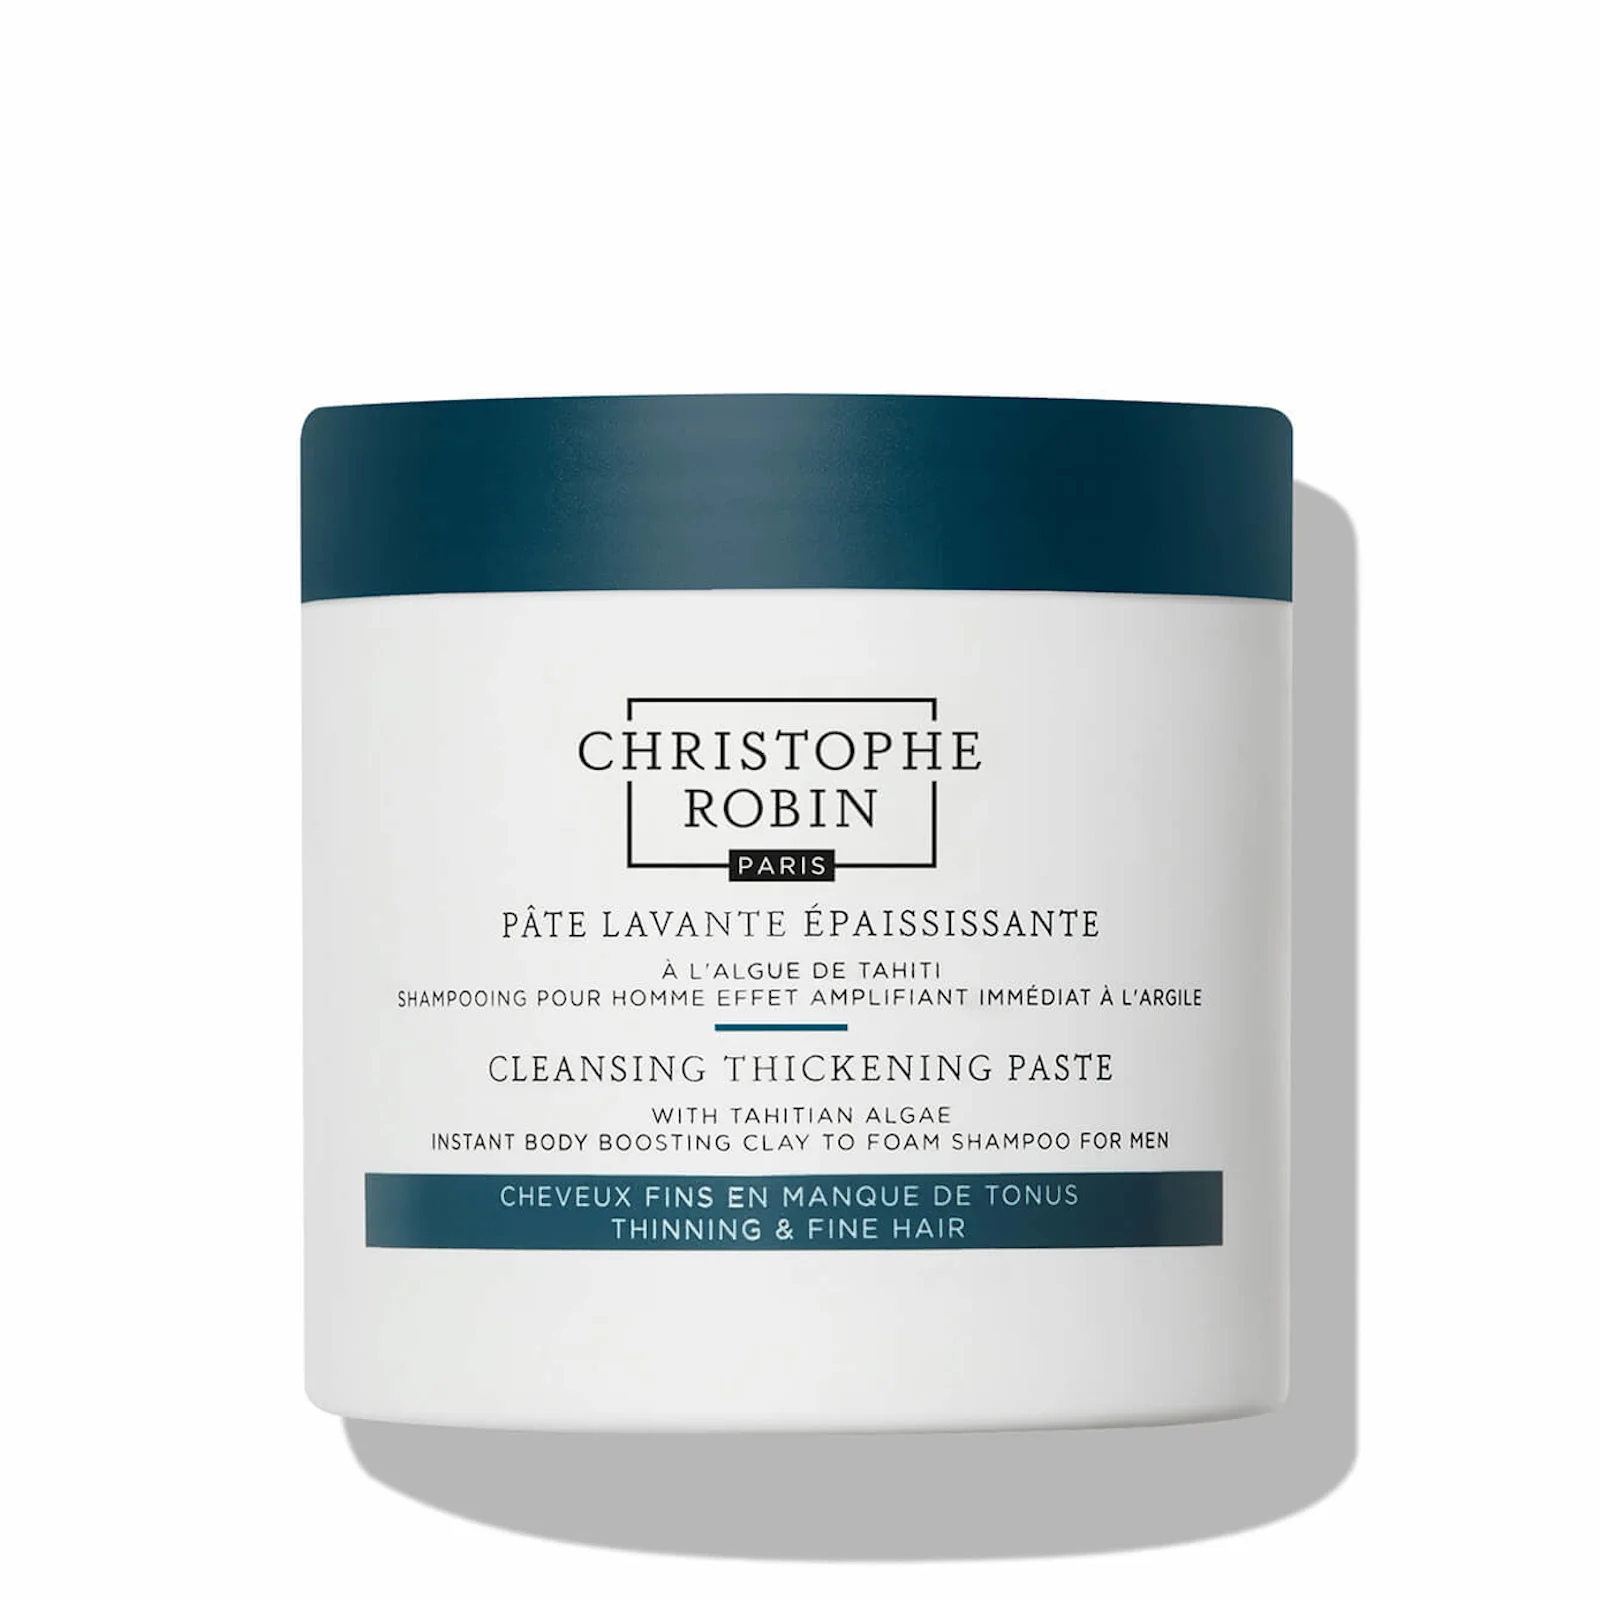 Christophe Robin Cleansing Thickening Paste with Pure Rassoul Clay and Tahitian Algae 250ml Image 1